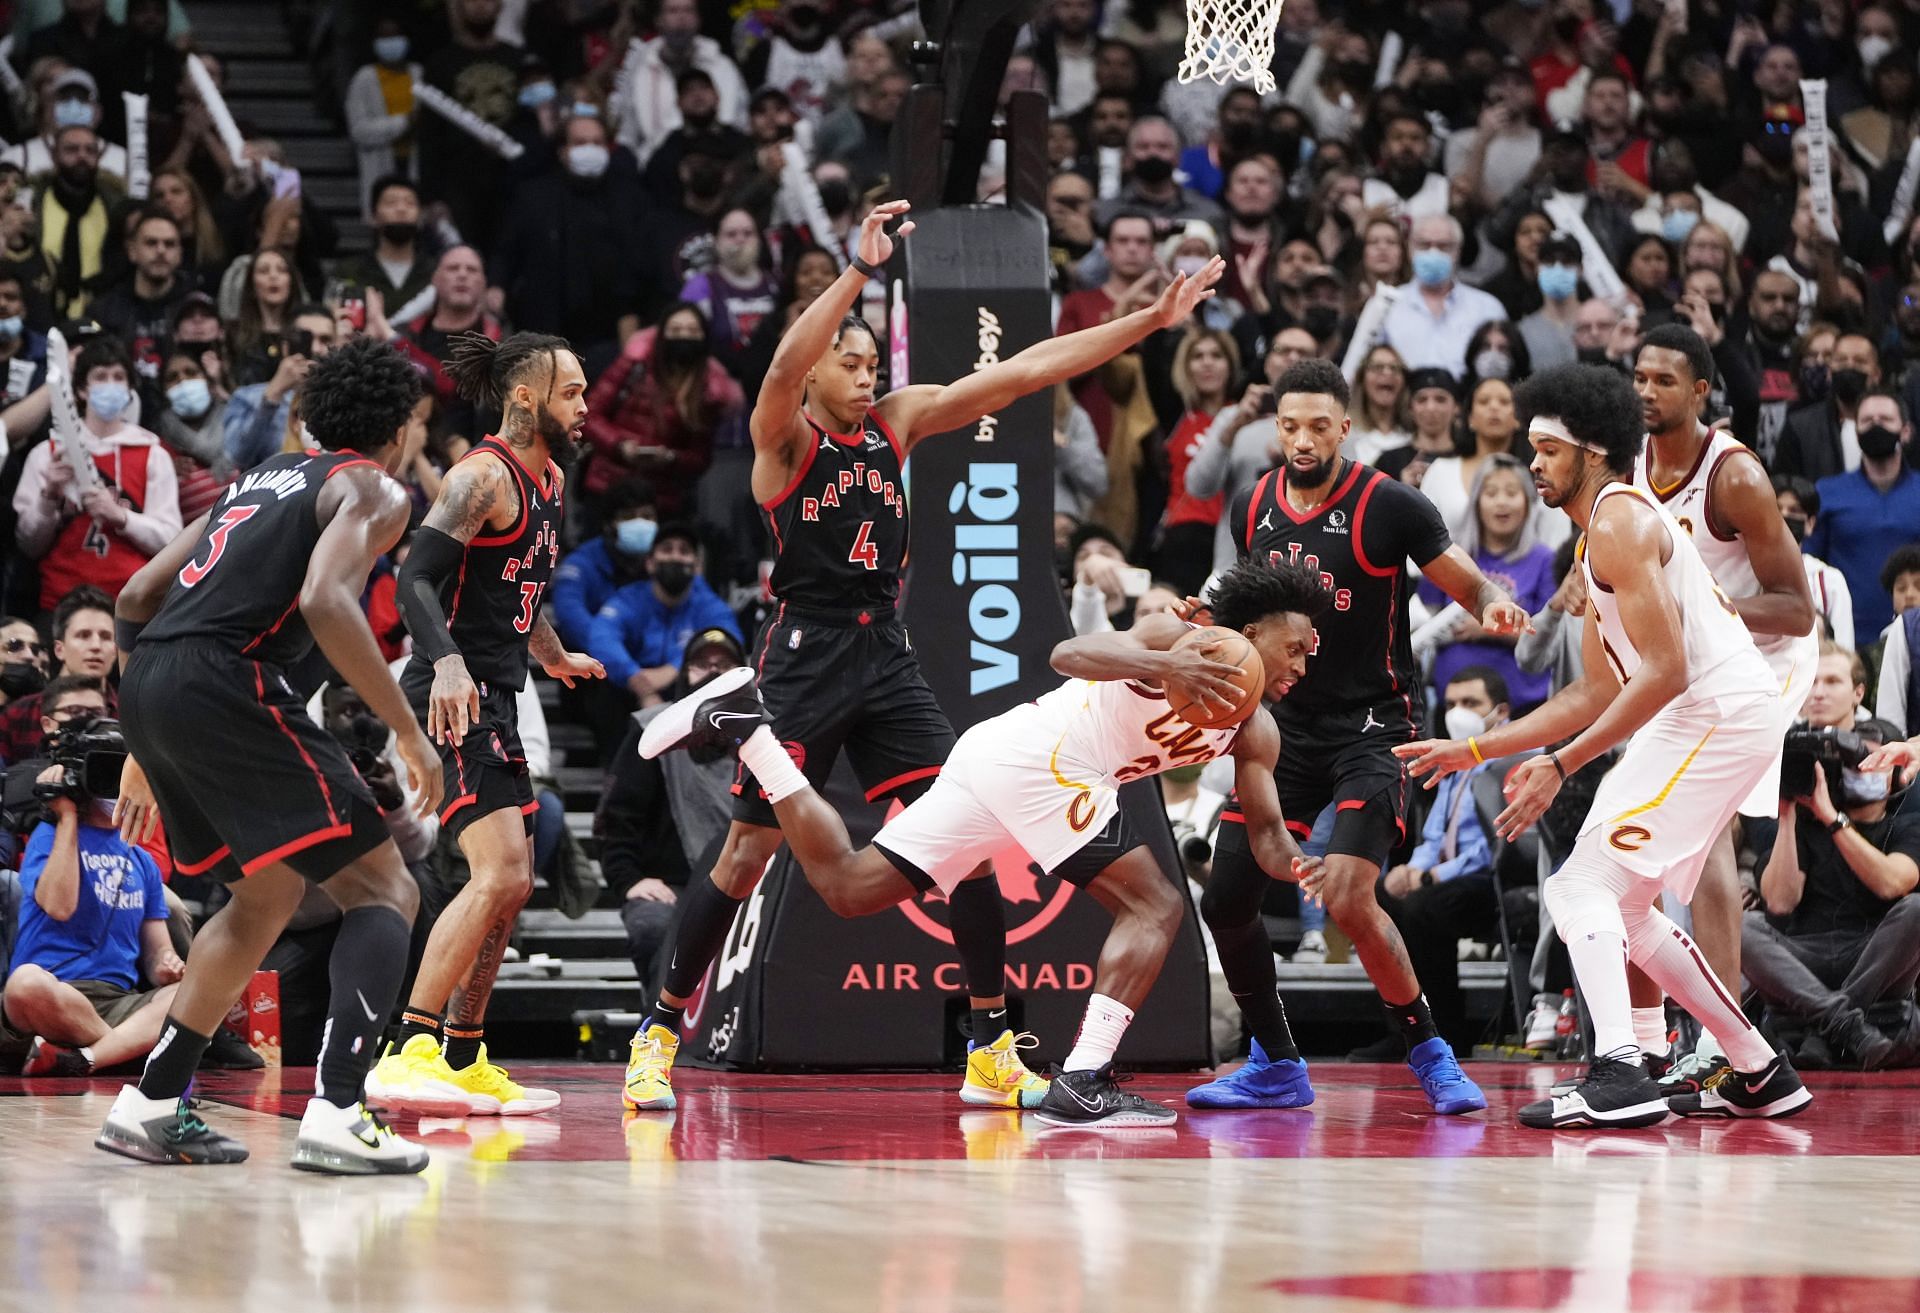 Action from the Cleveland Cavaliers v Toronto Raptors game